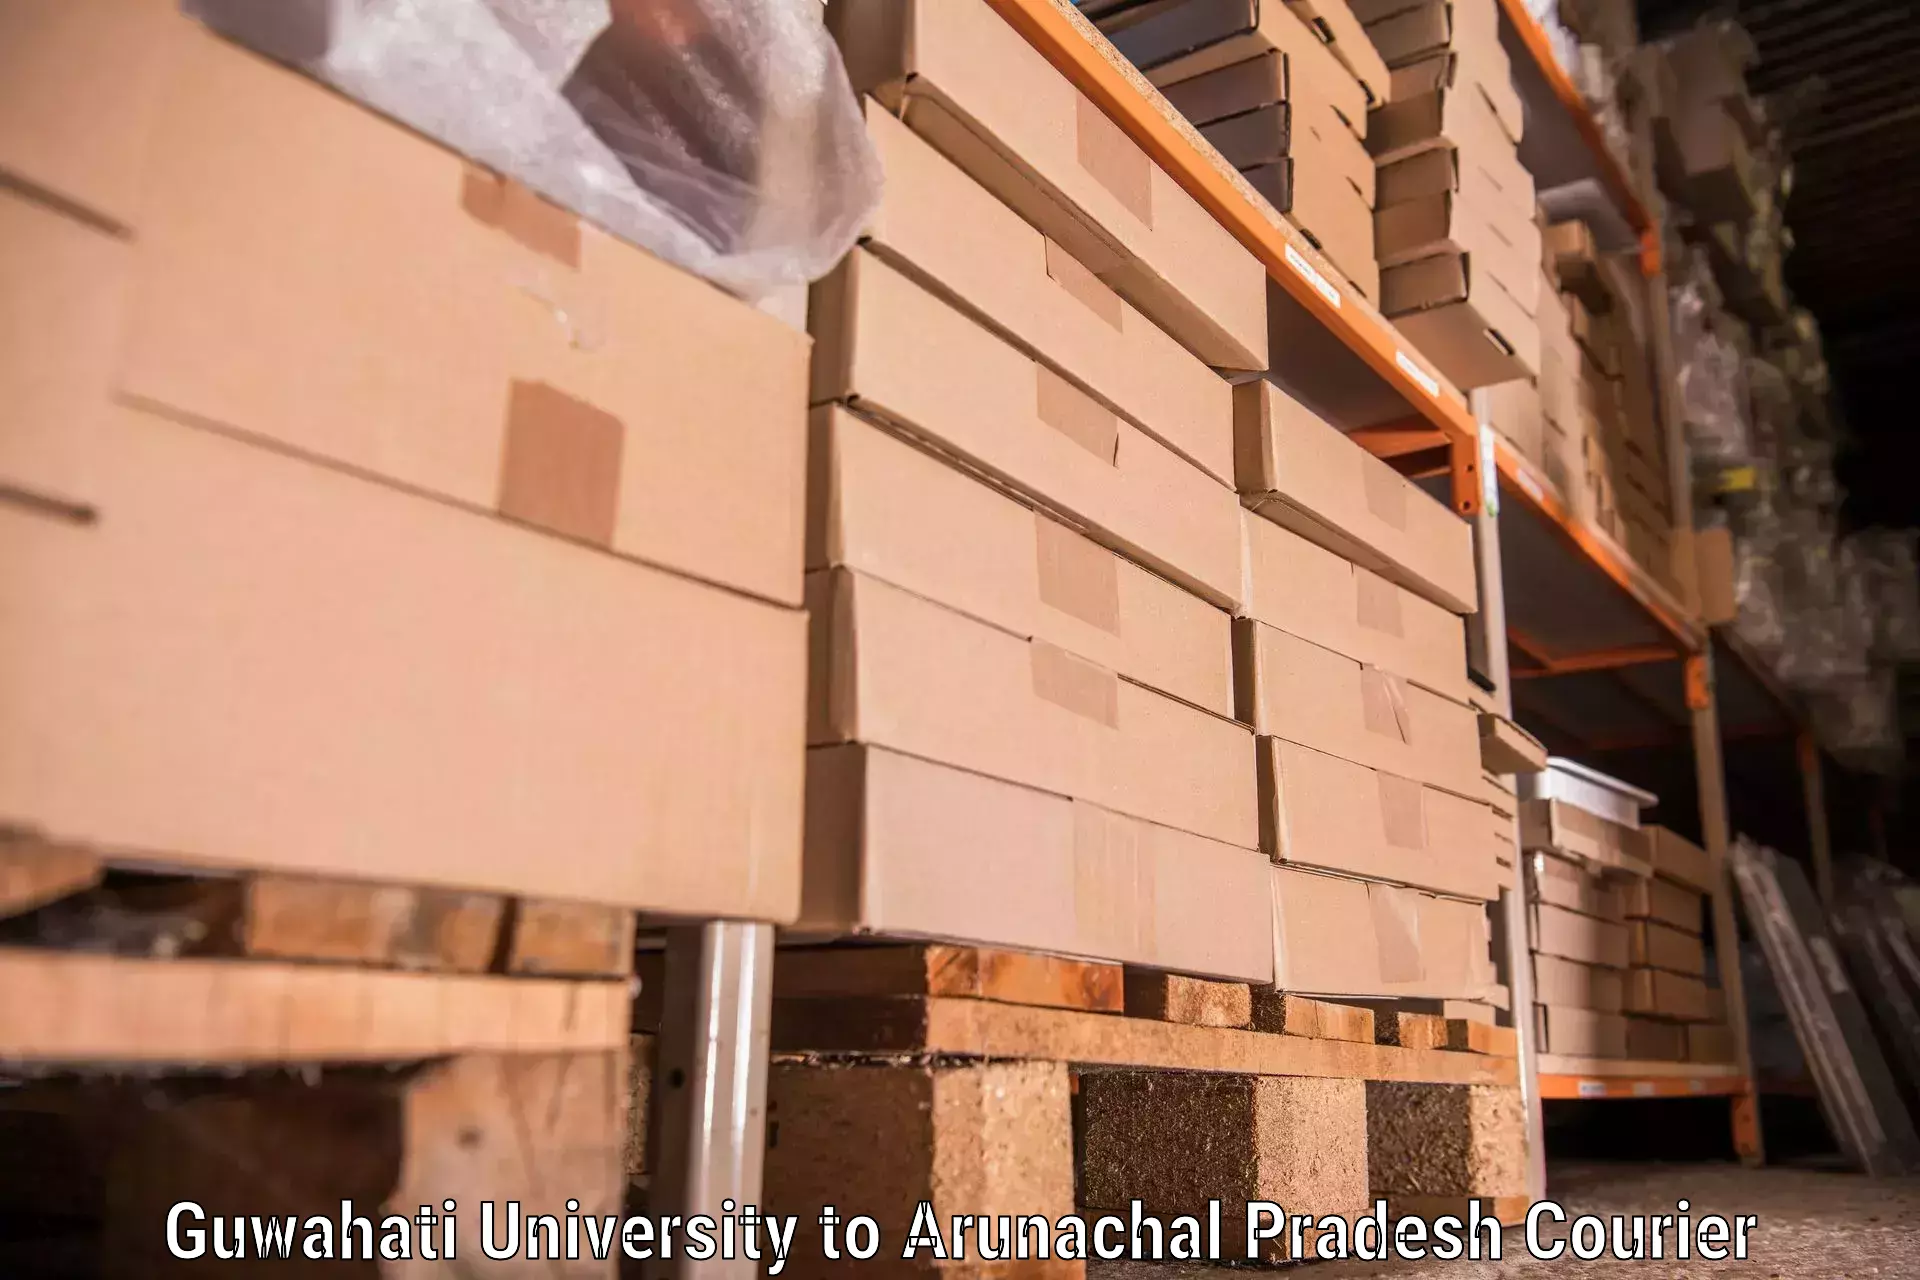 High-quality moving services Guwahati University to East Kameng